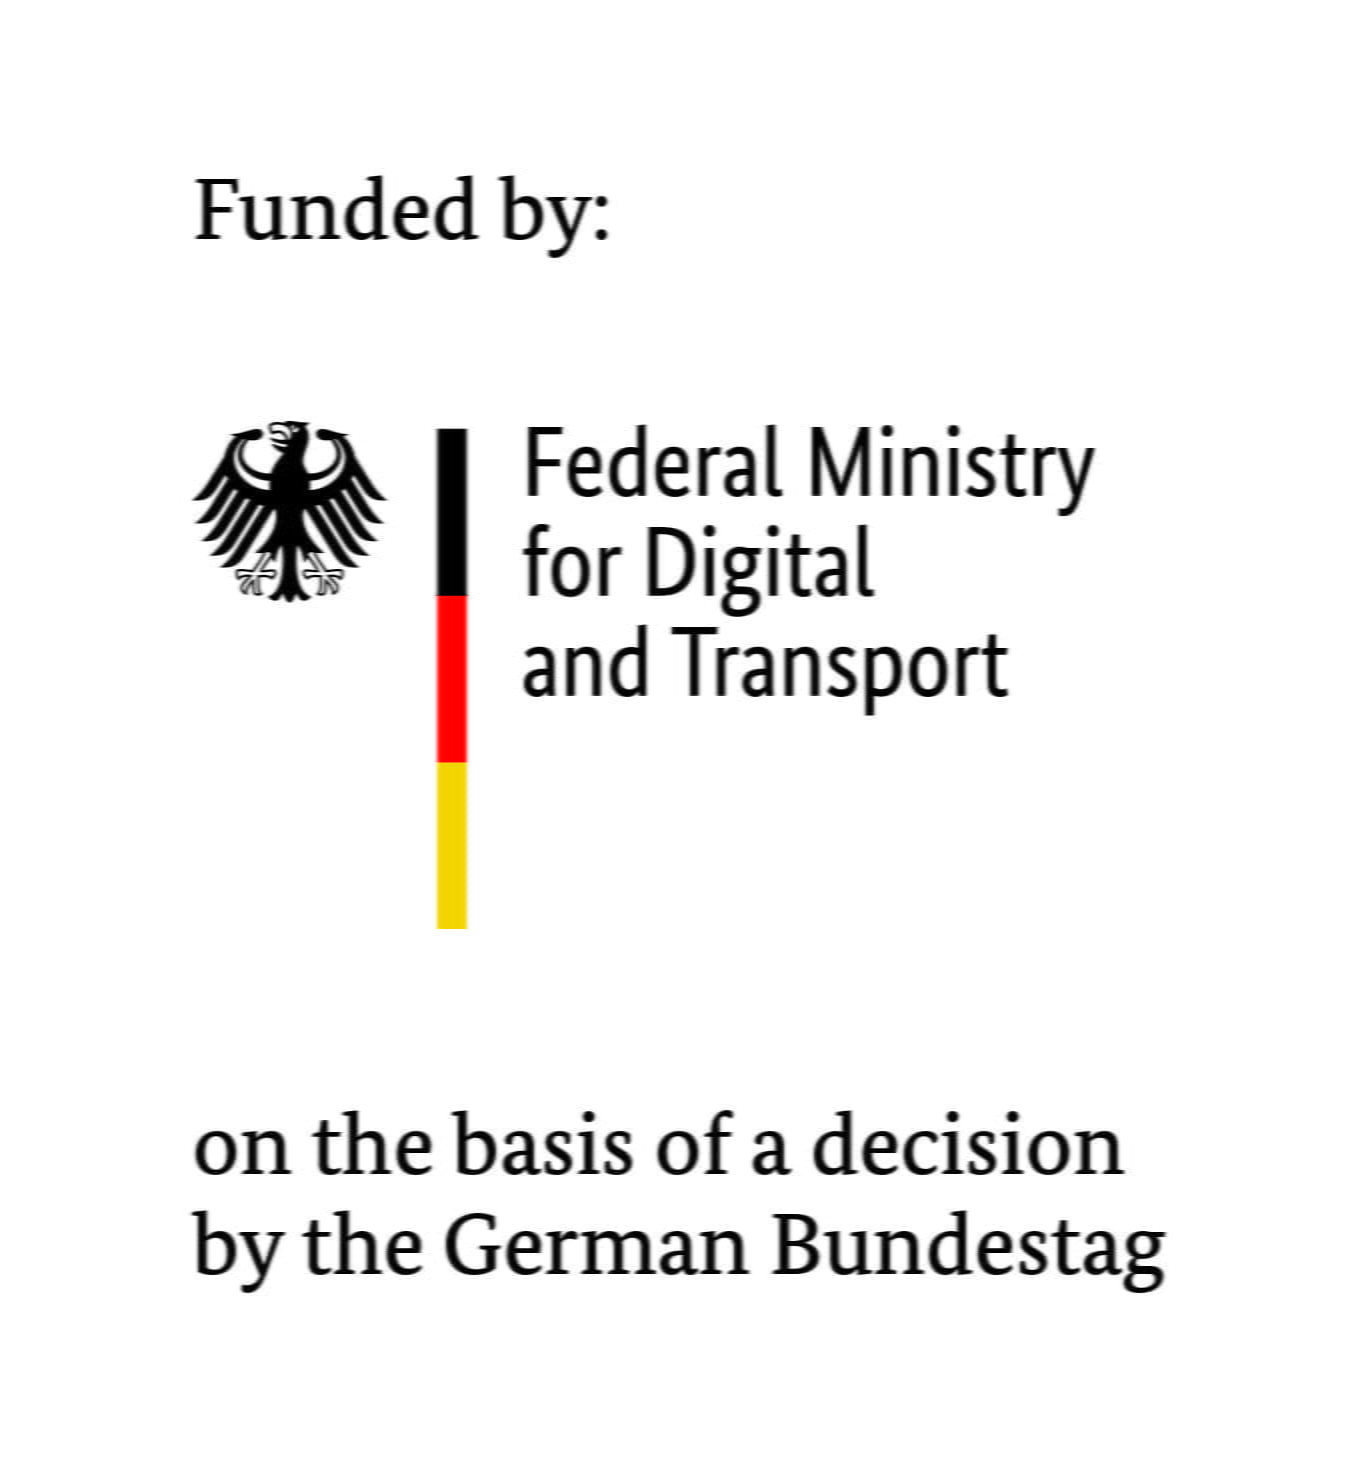 Logo Funded by Federal Ministry for Digital and Transport